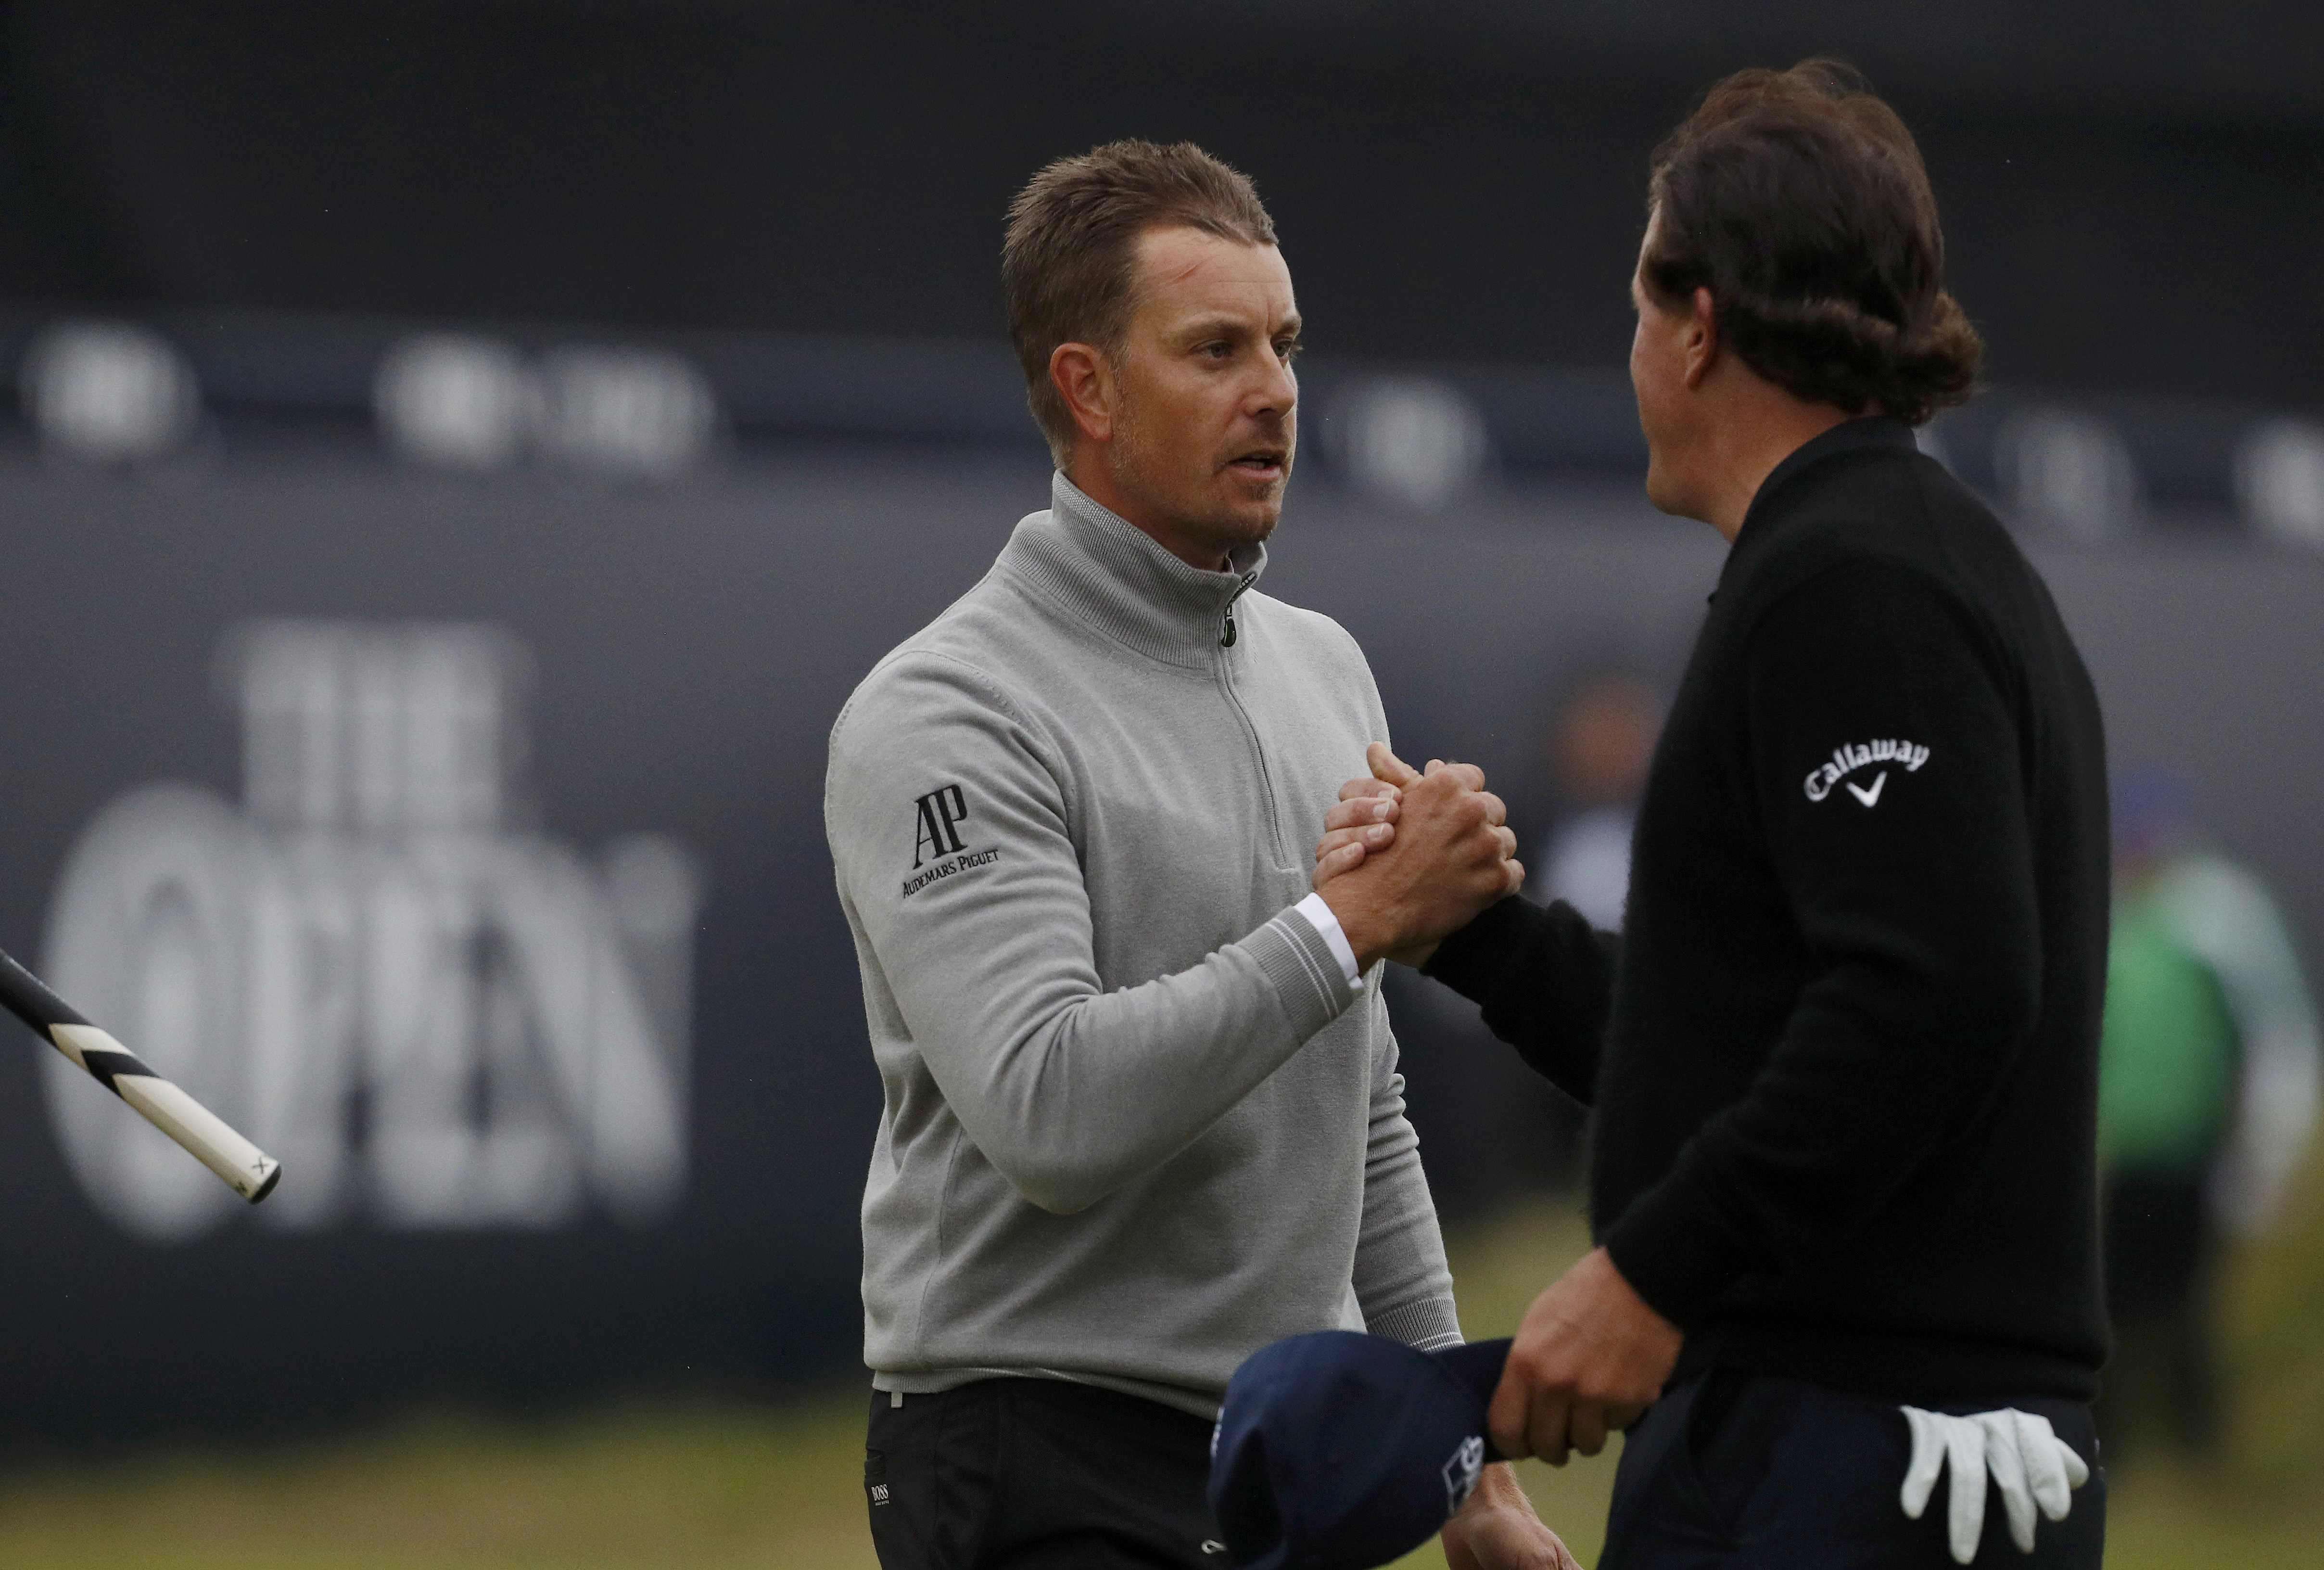 Phil Mickelson of the U.S. shakes hands with Sweden's Henrik Stenson on the 18th green during the third round. REUTERS/Craig Brough